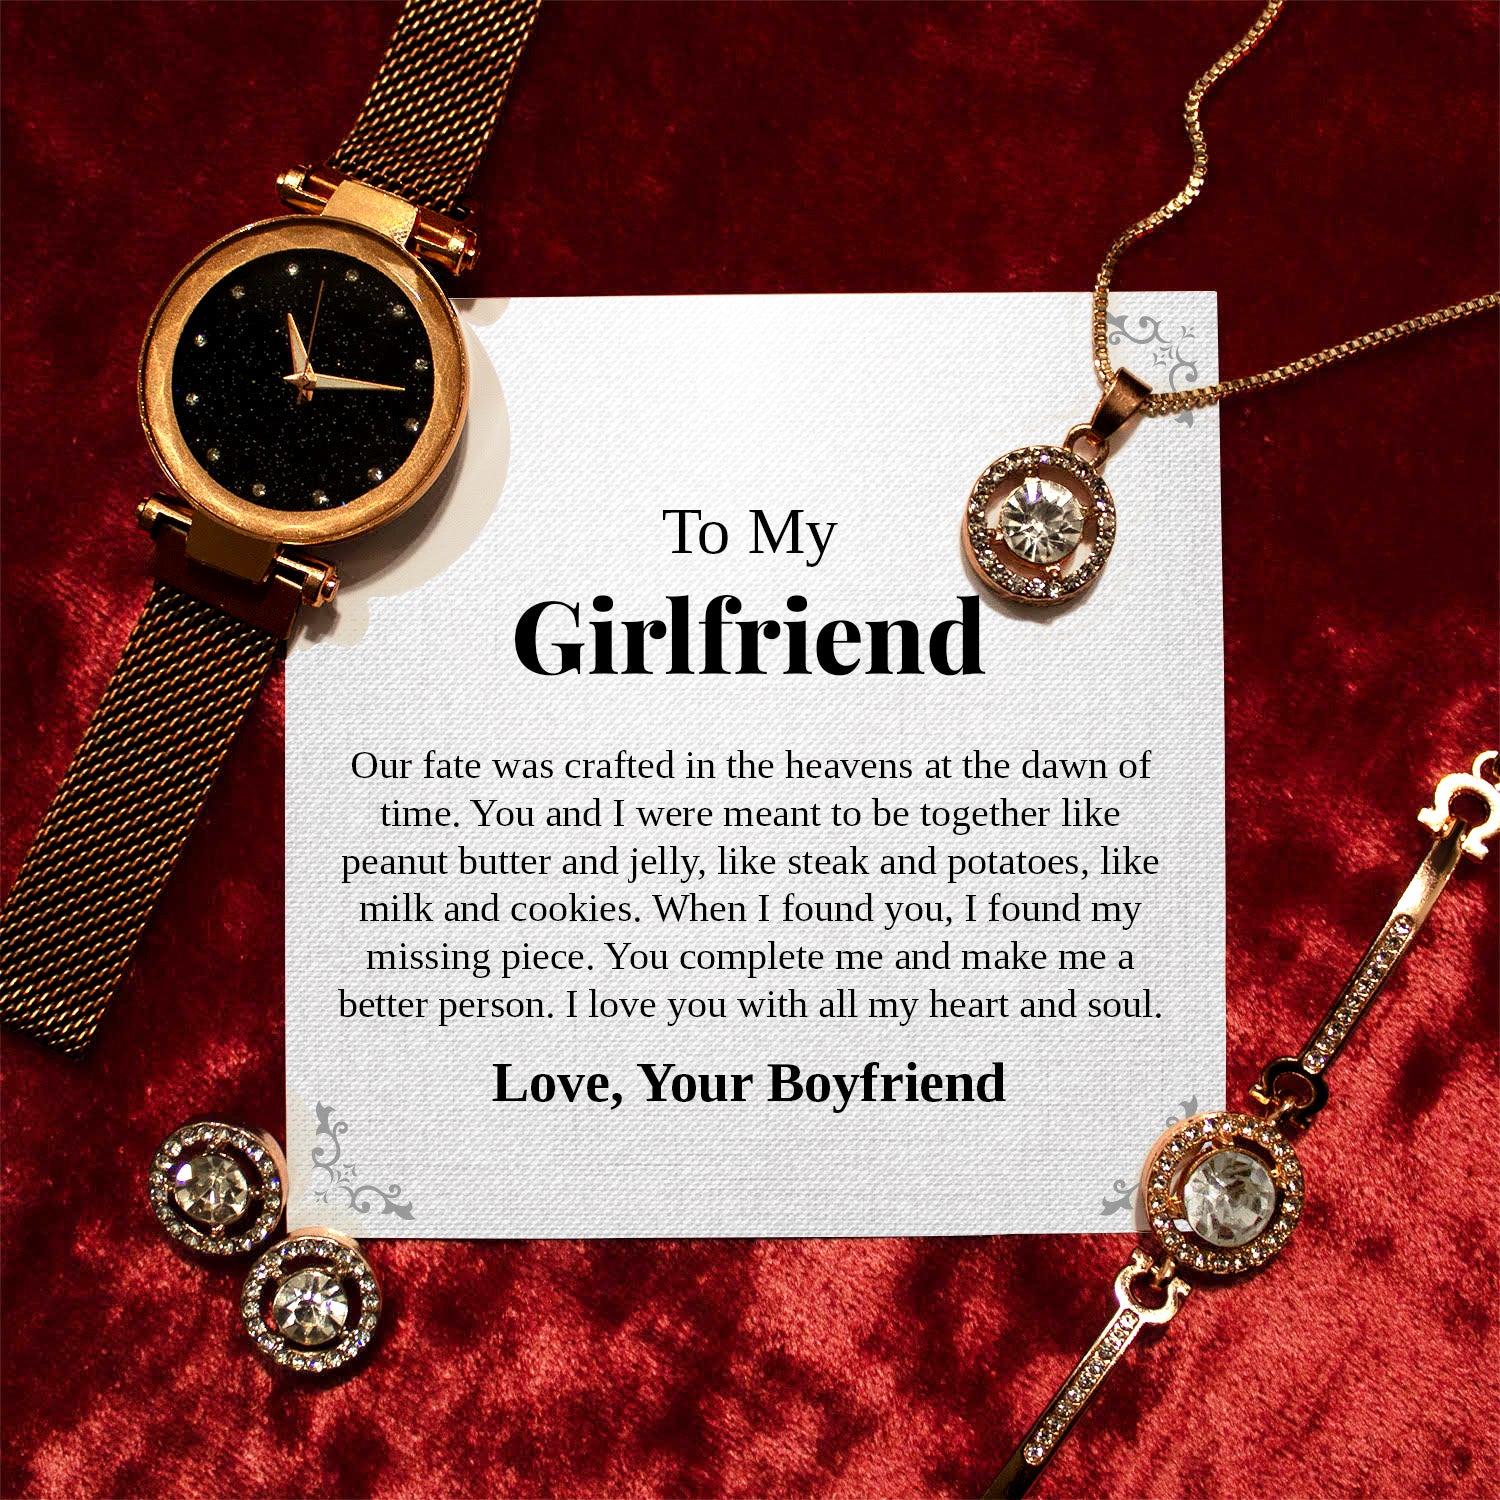 To My Girlfriend | “Crafted in the Heavens” | Cosmopolitan Set